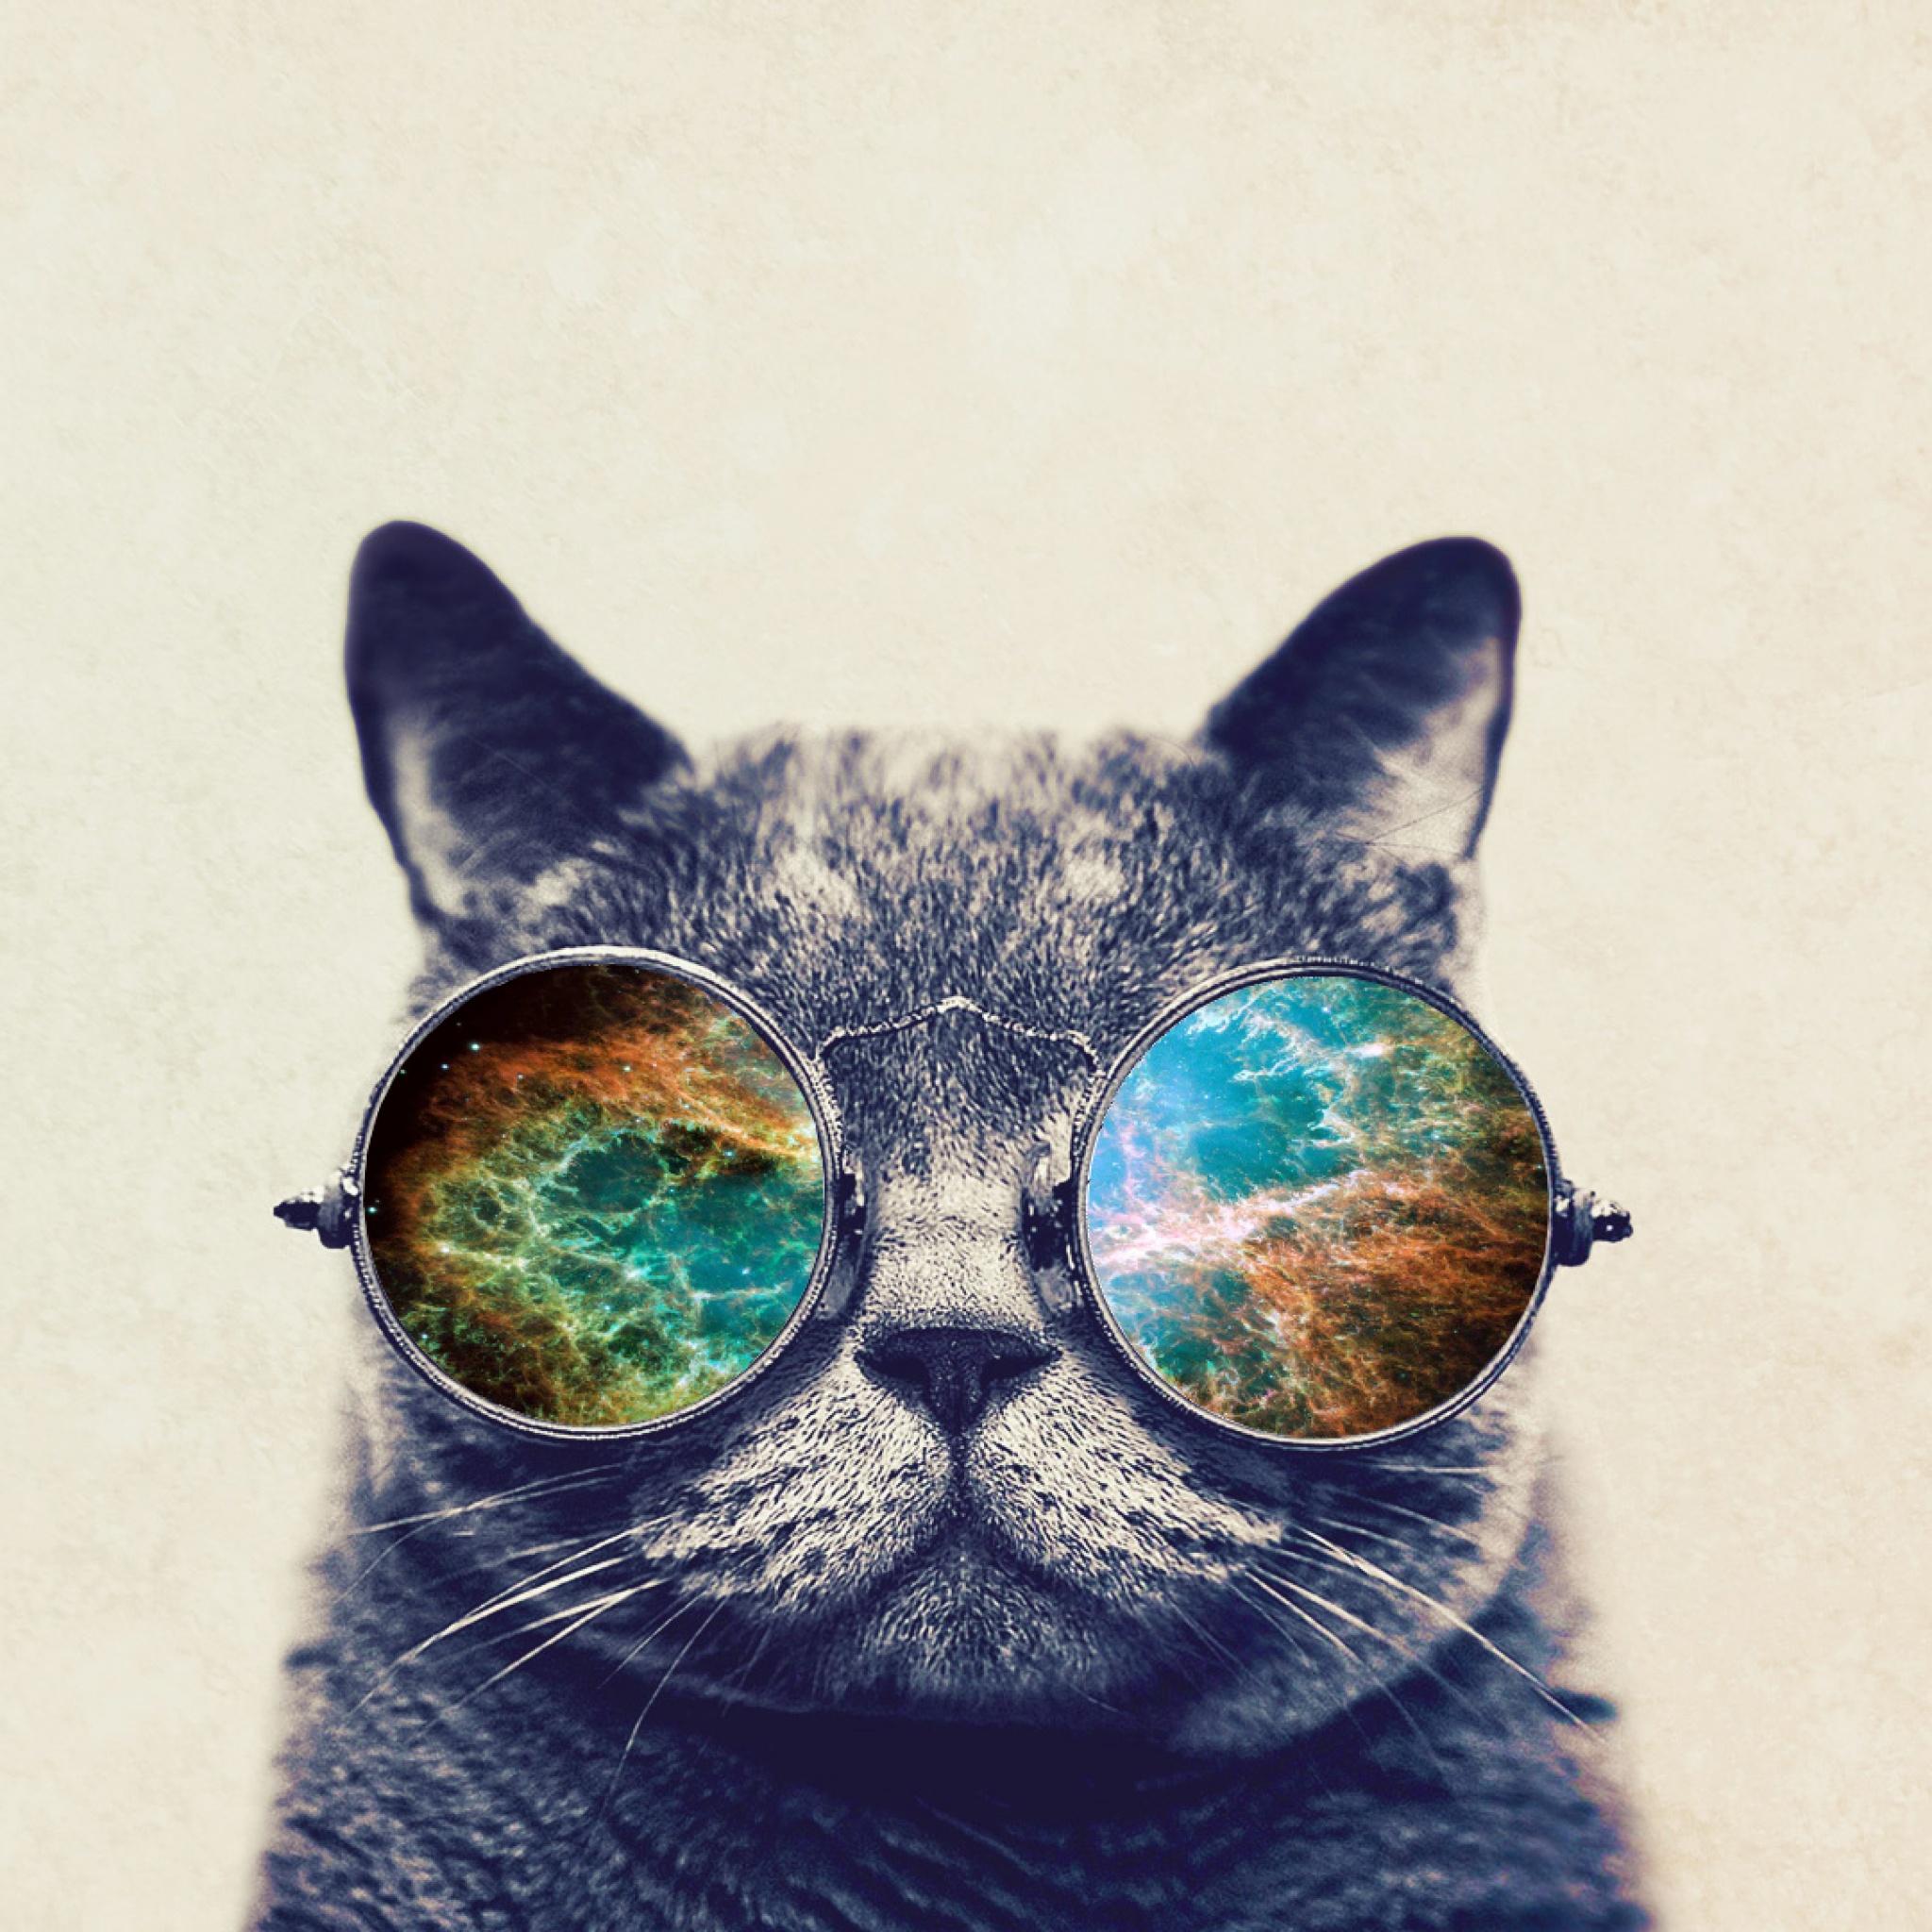 Cat With Glasses Wallpaper (Picture)